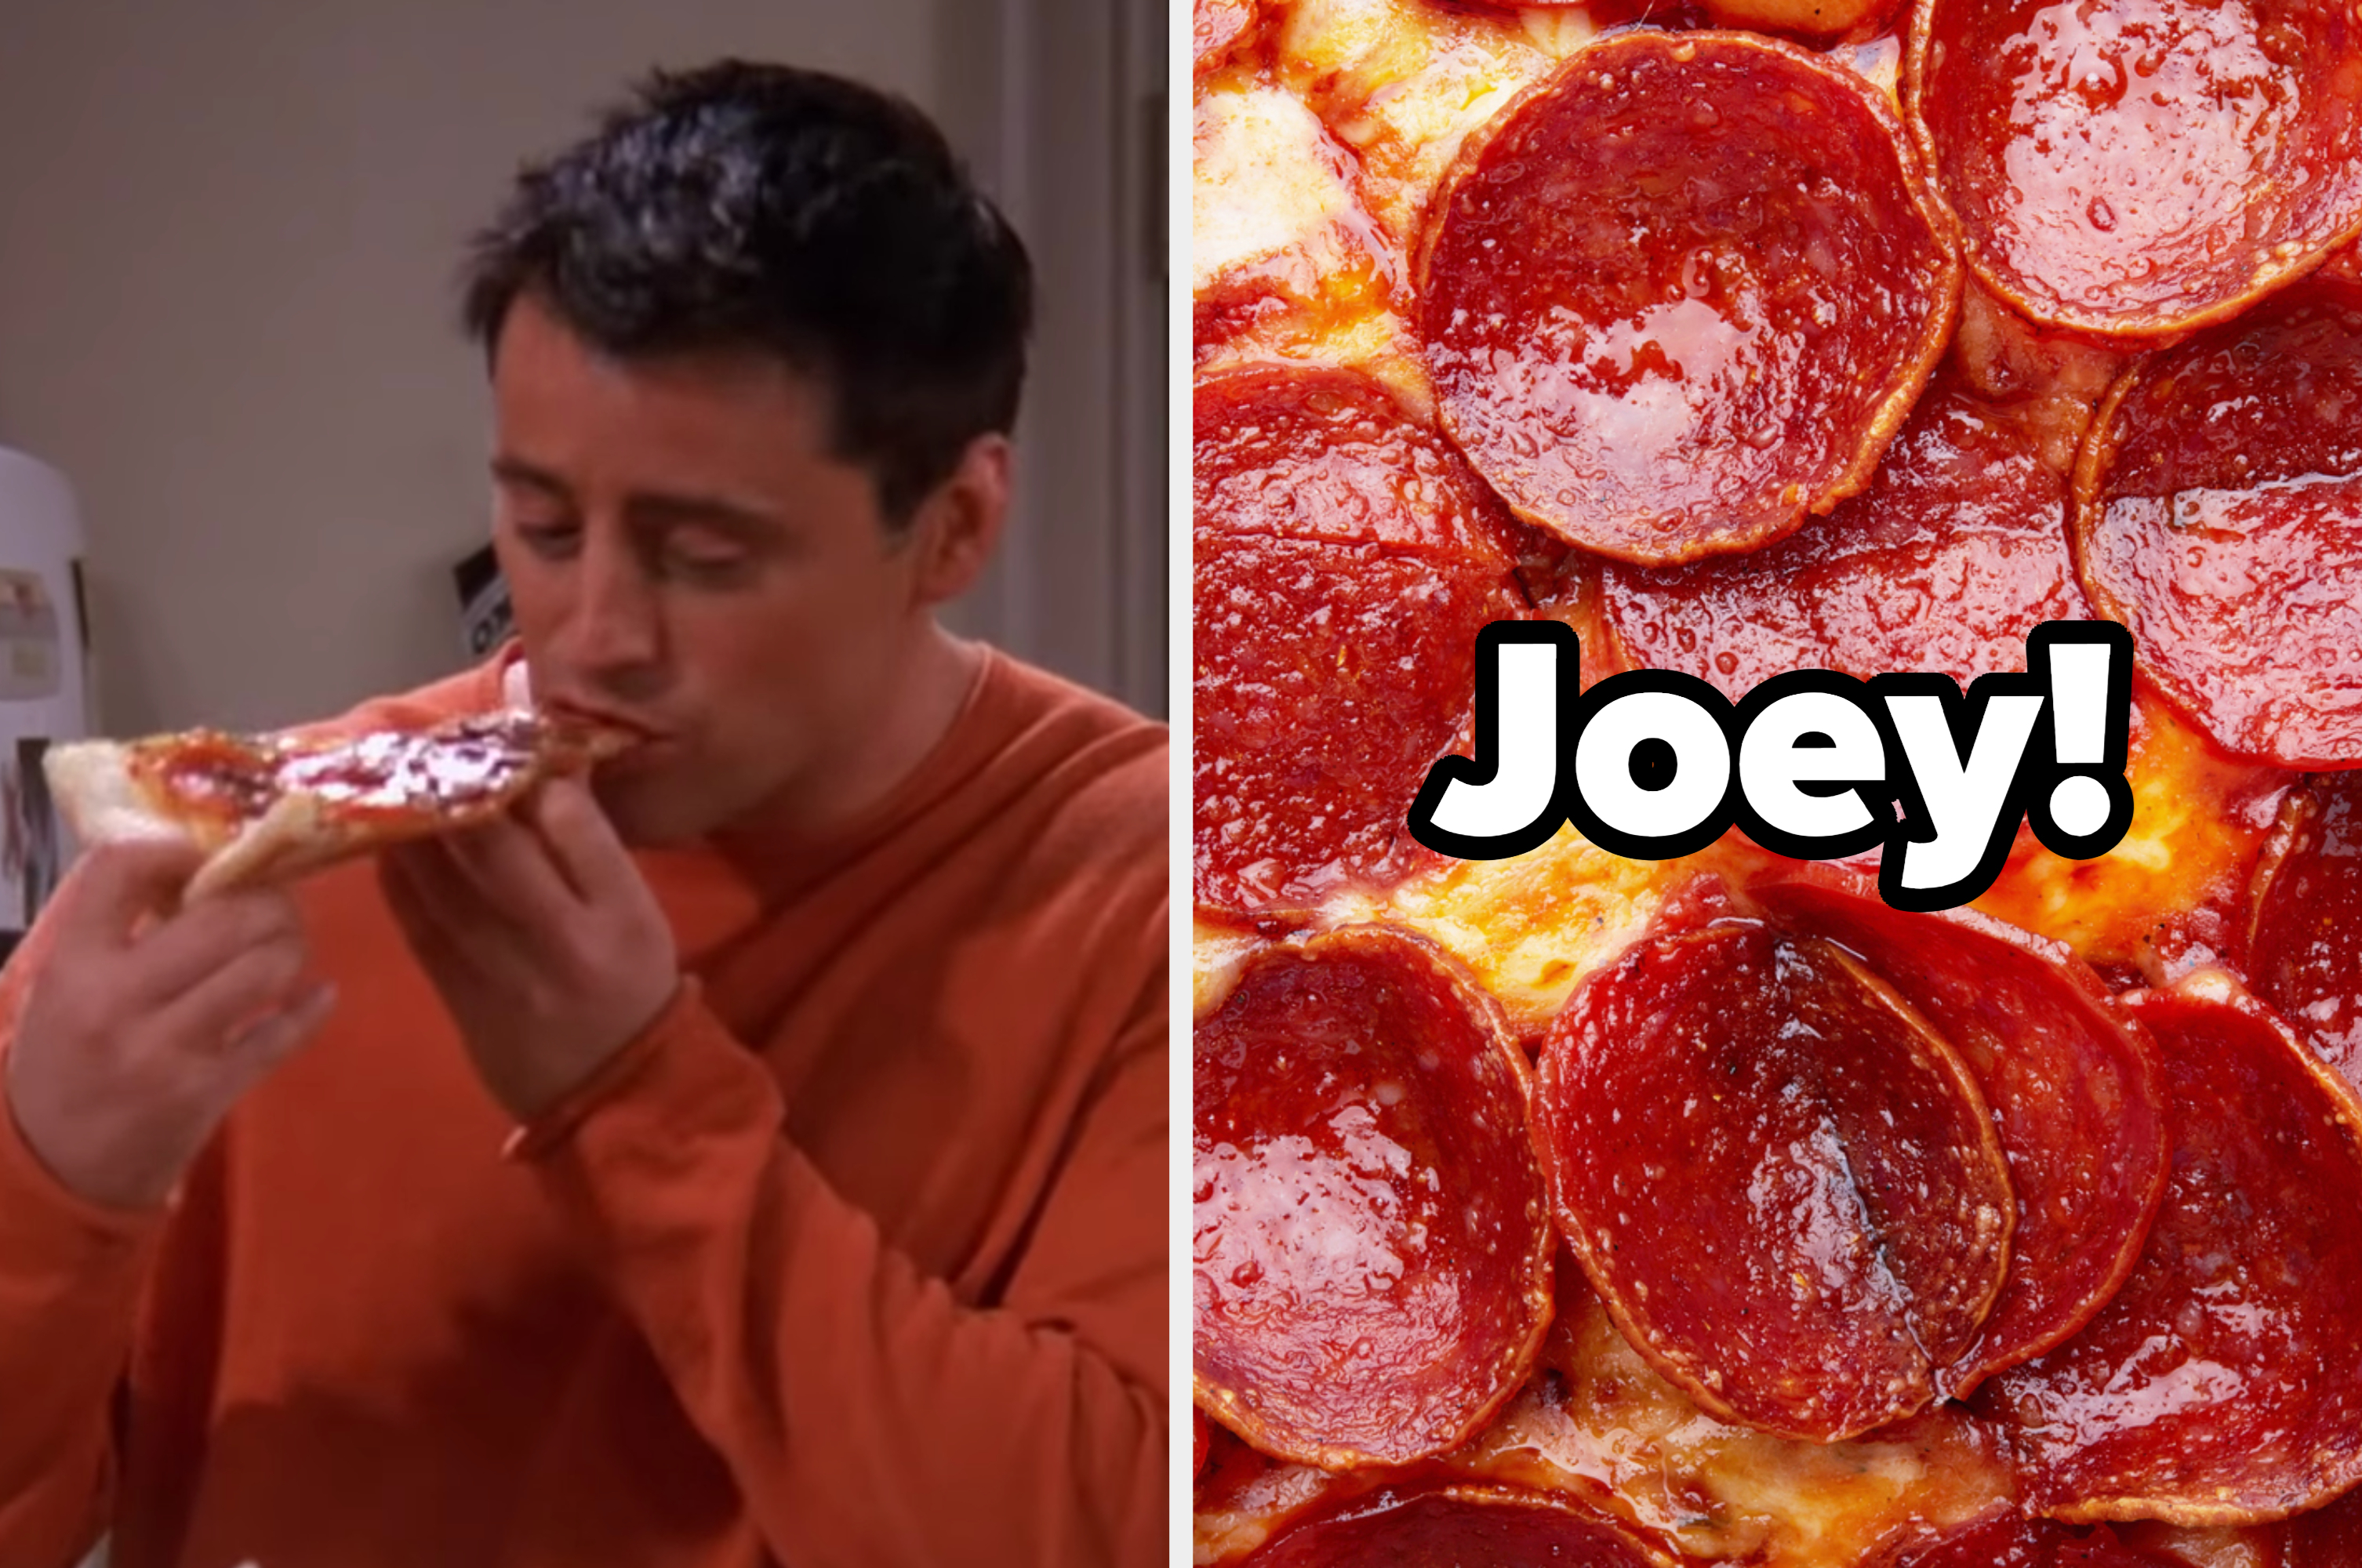 Which Friends Character Are You Based On Your Pizza Preferences?